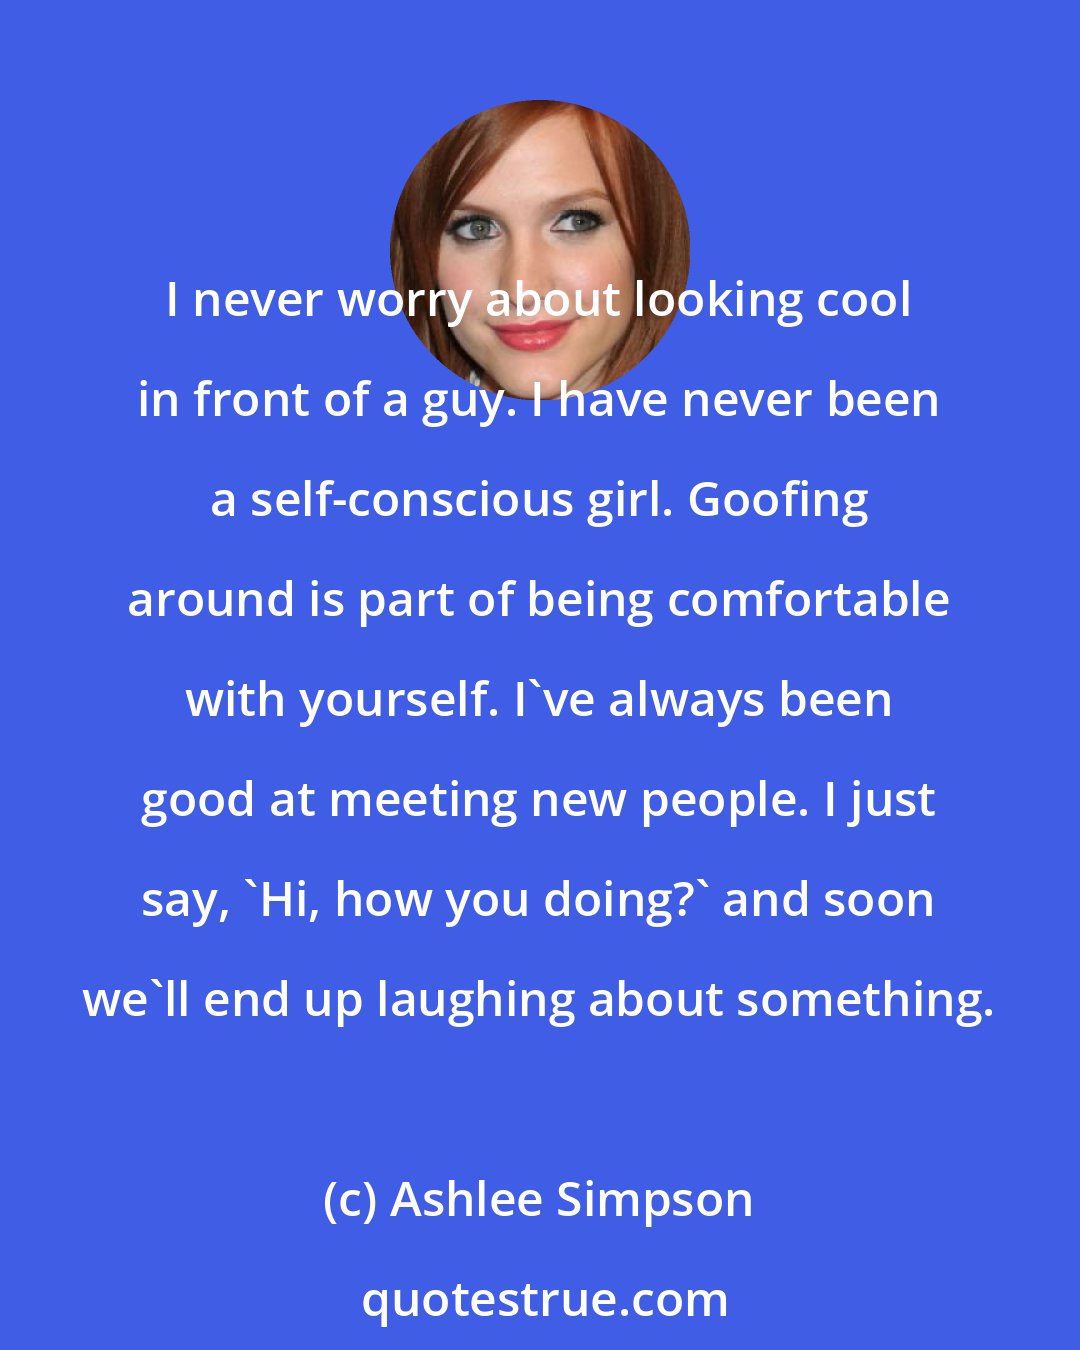 Ashlee Simpson: I never worry about looking cool in front of a guy. I have never been a self-conscious girl. Goofing around is part of being comfortable with yourself. I've always been good at meeting new people. I just say, 'Hi, how you doing?' and soon we'll end up laughing about something.